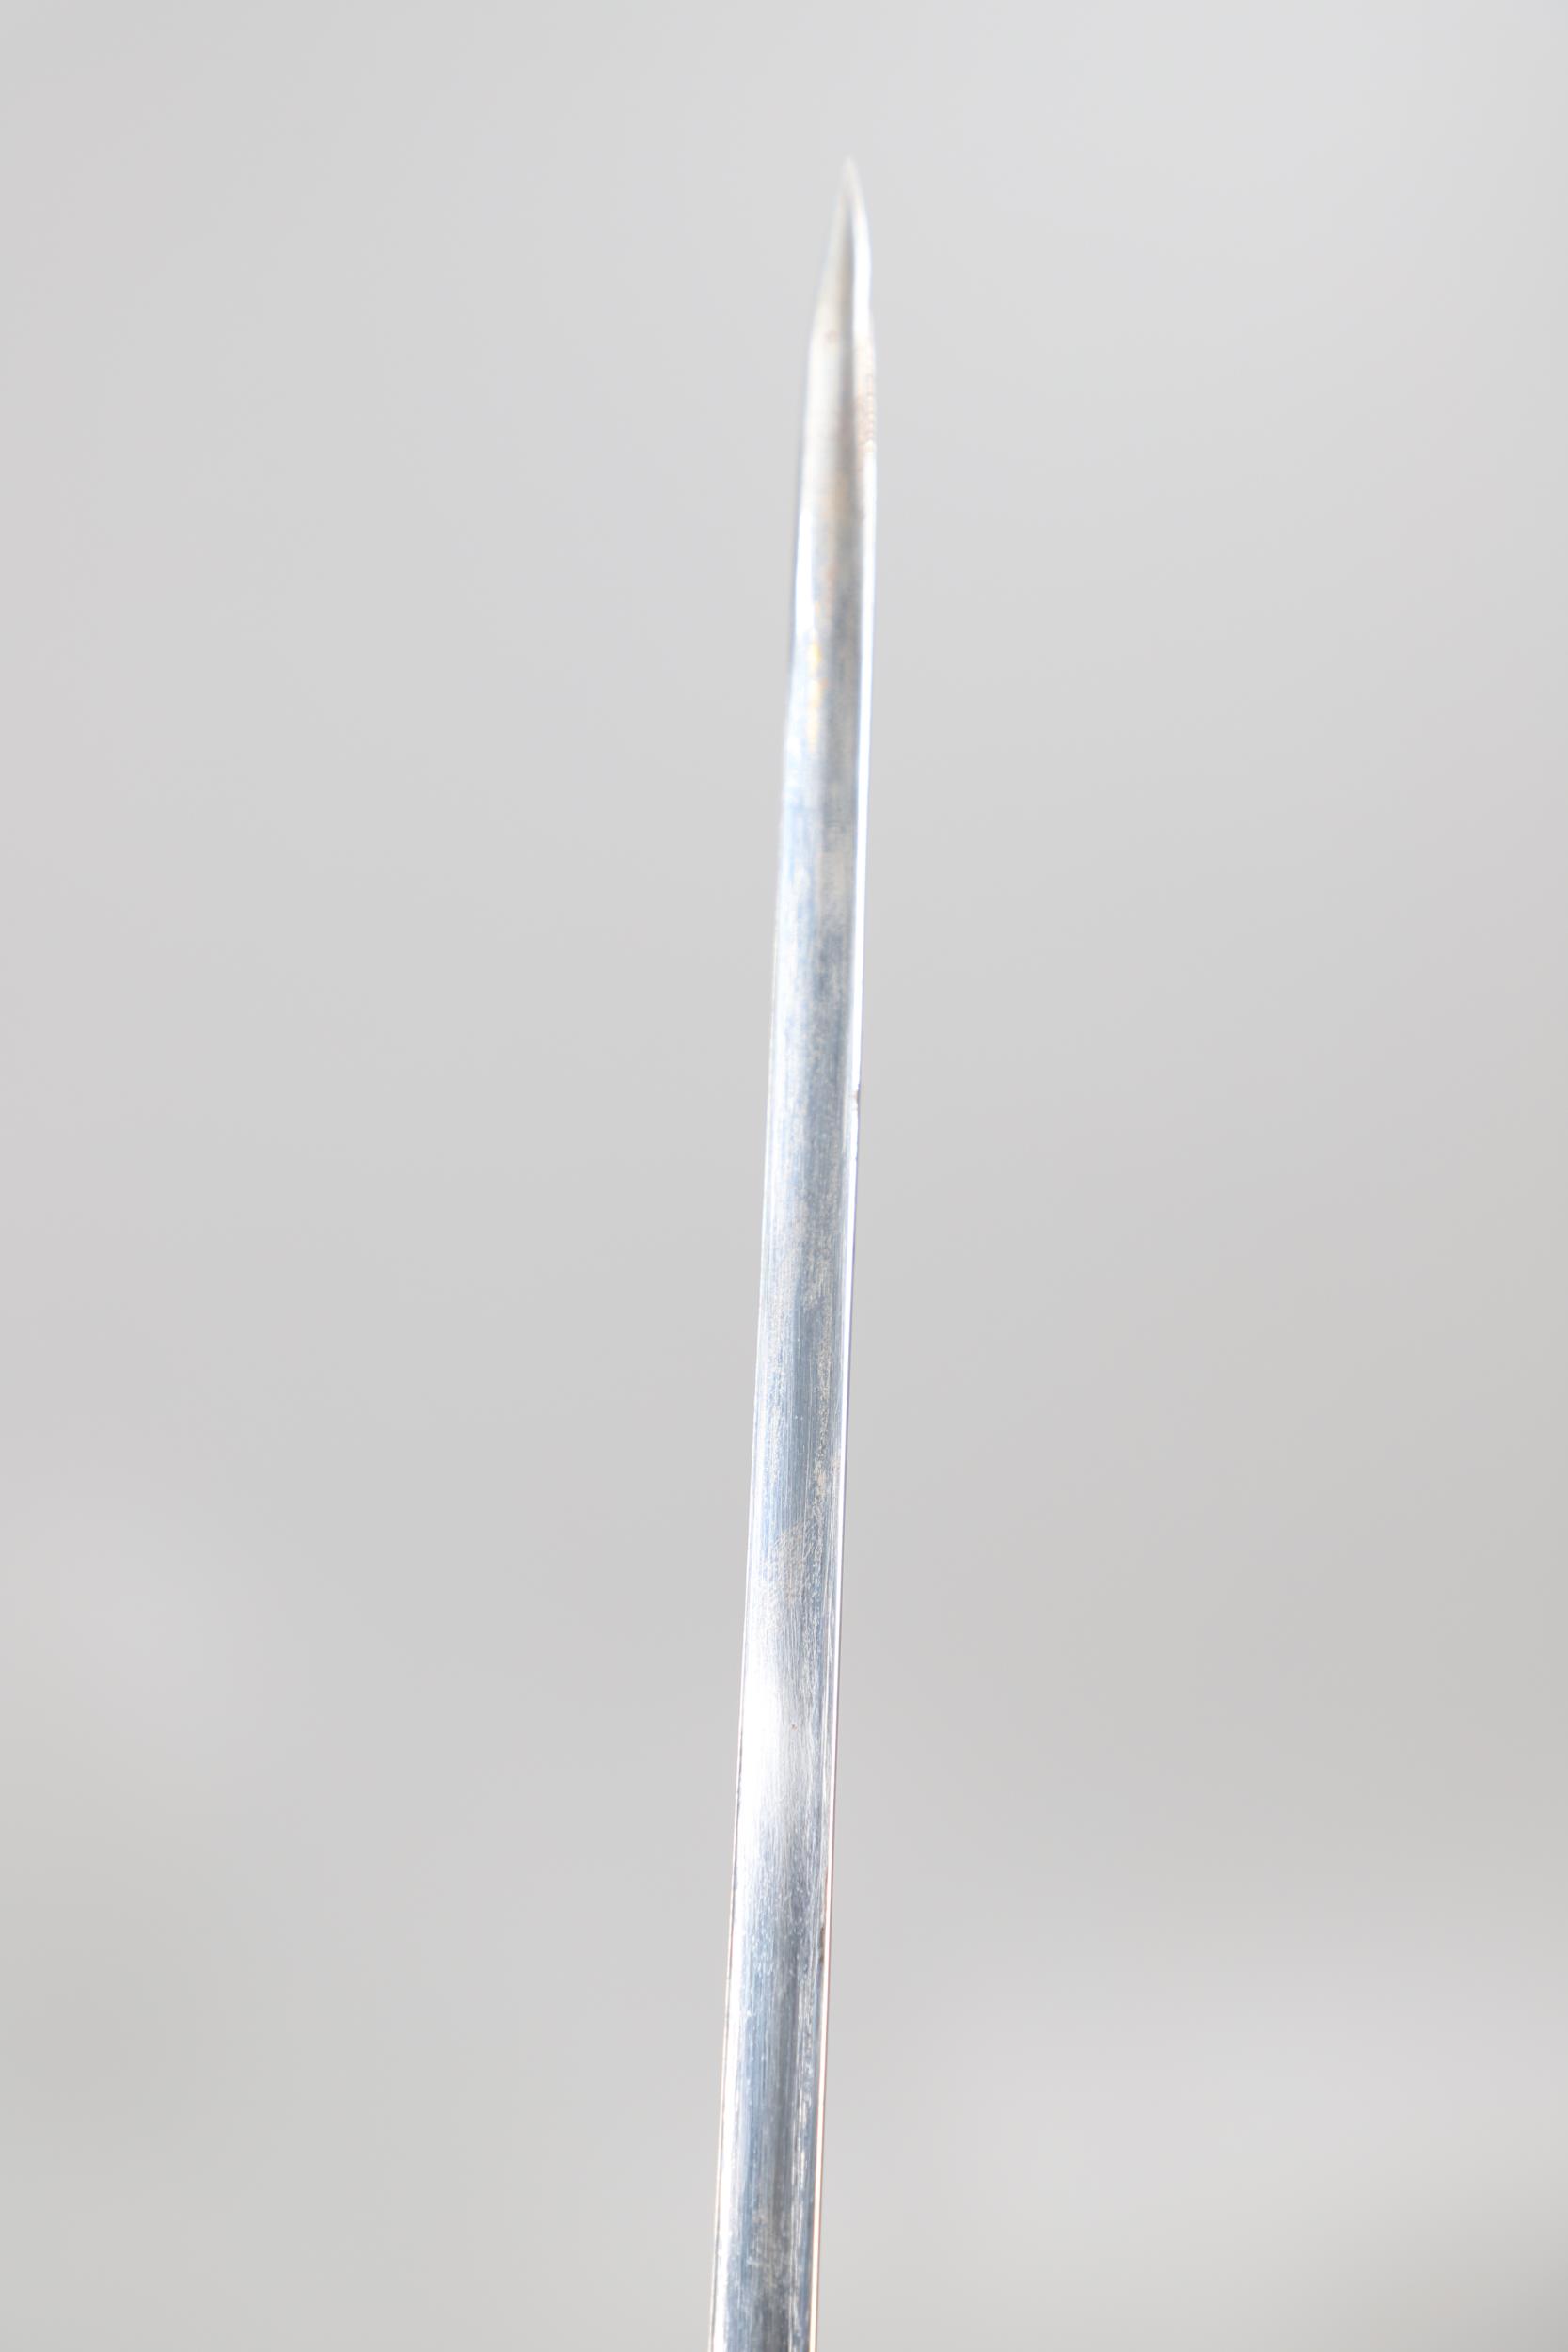 A WILKINSON COURT SWORD HAVING BELONGED TO THE HIGH SHERIFF OF WARWICKSHIRE. - Image 13 of 17